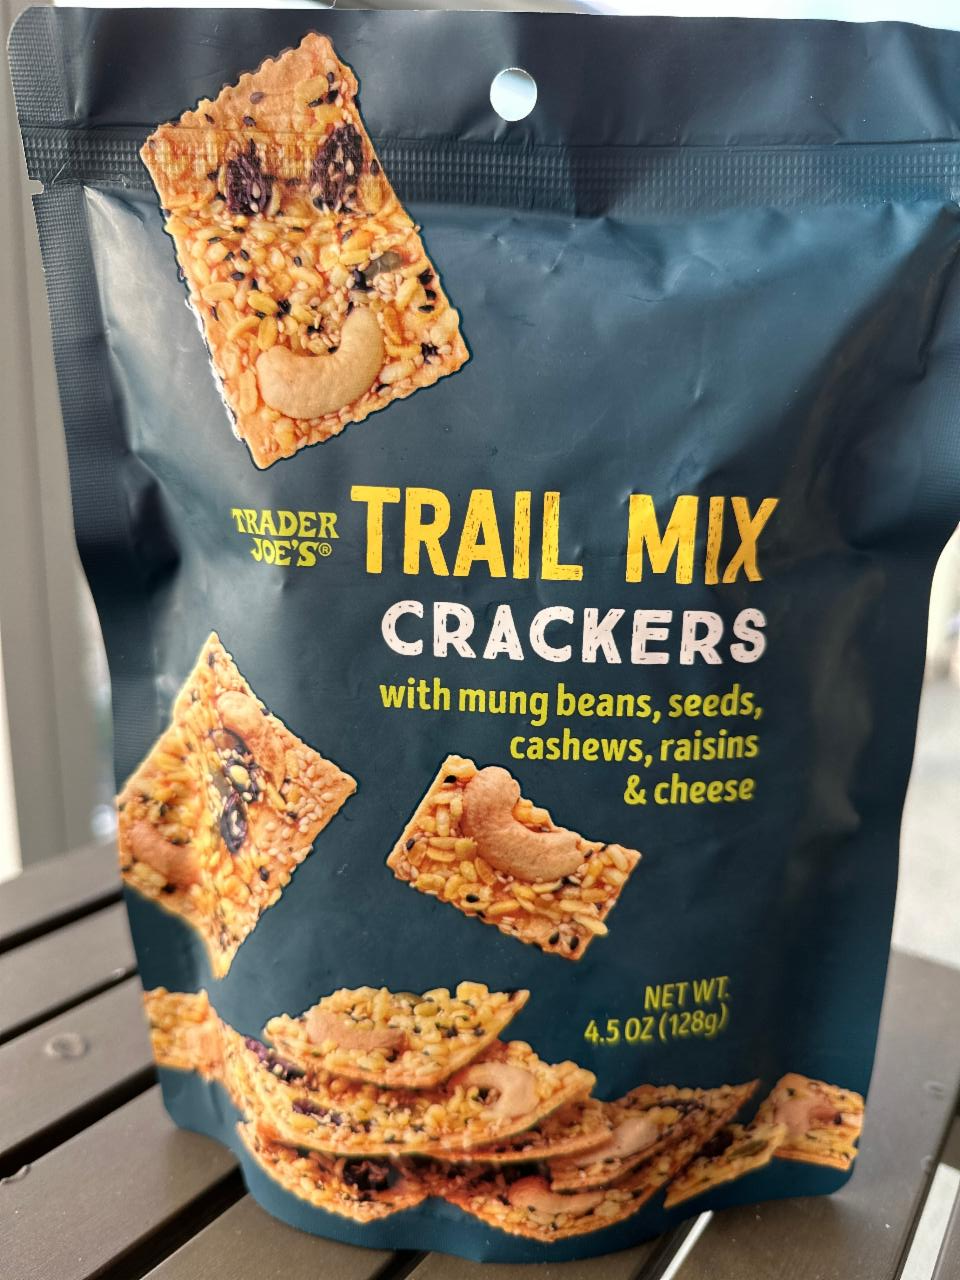 Фото - Trail Mix Crackers with mung beans, seeds, cashews, raisin, and cheese Trader Joe’s